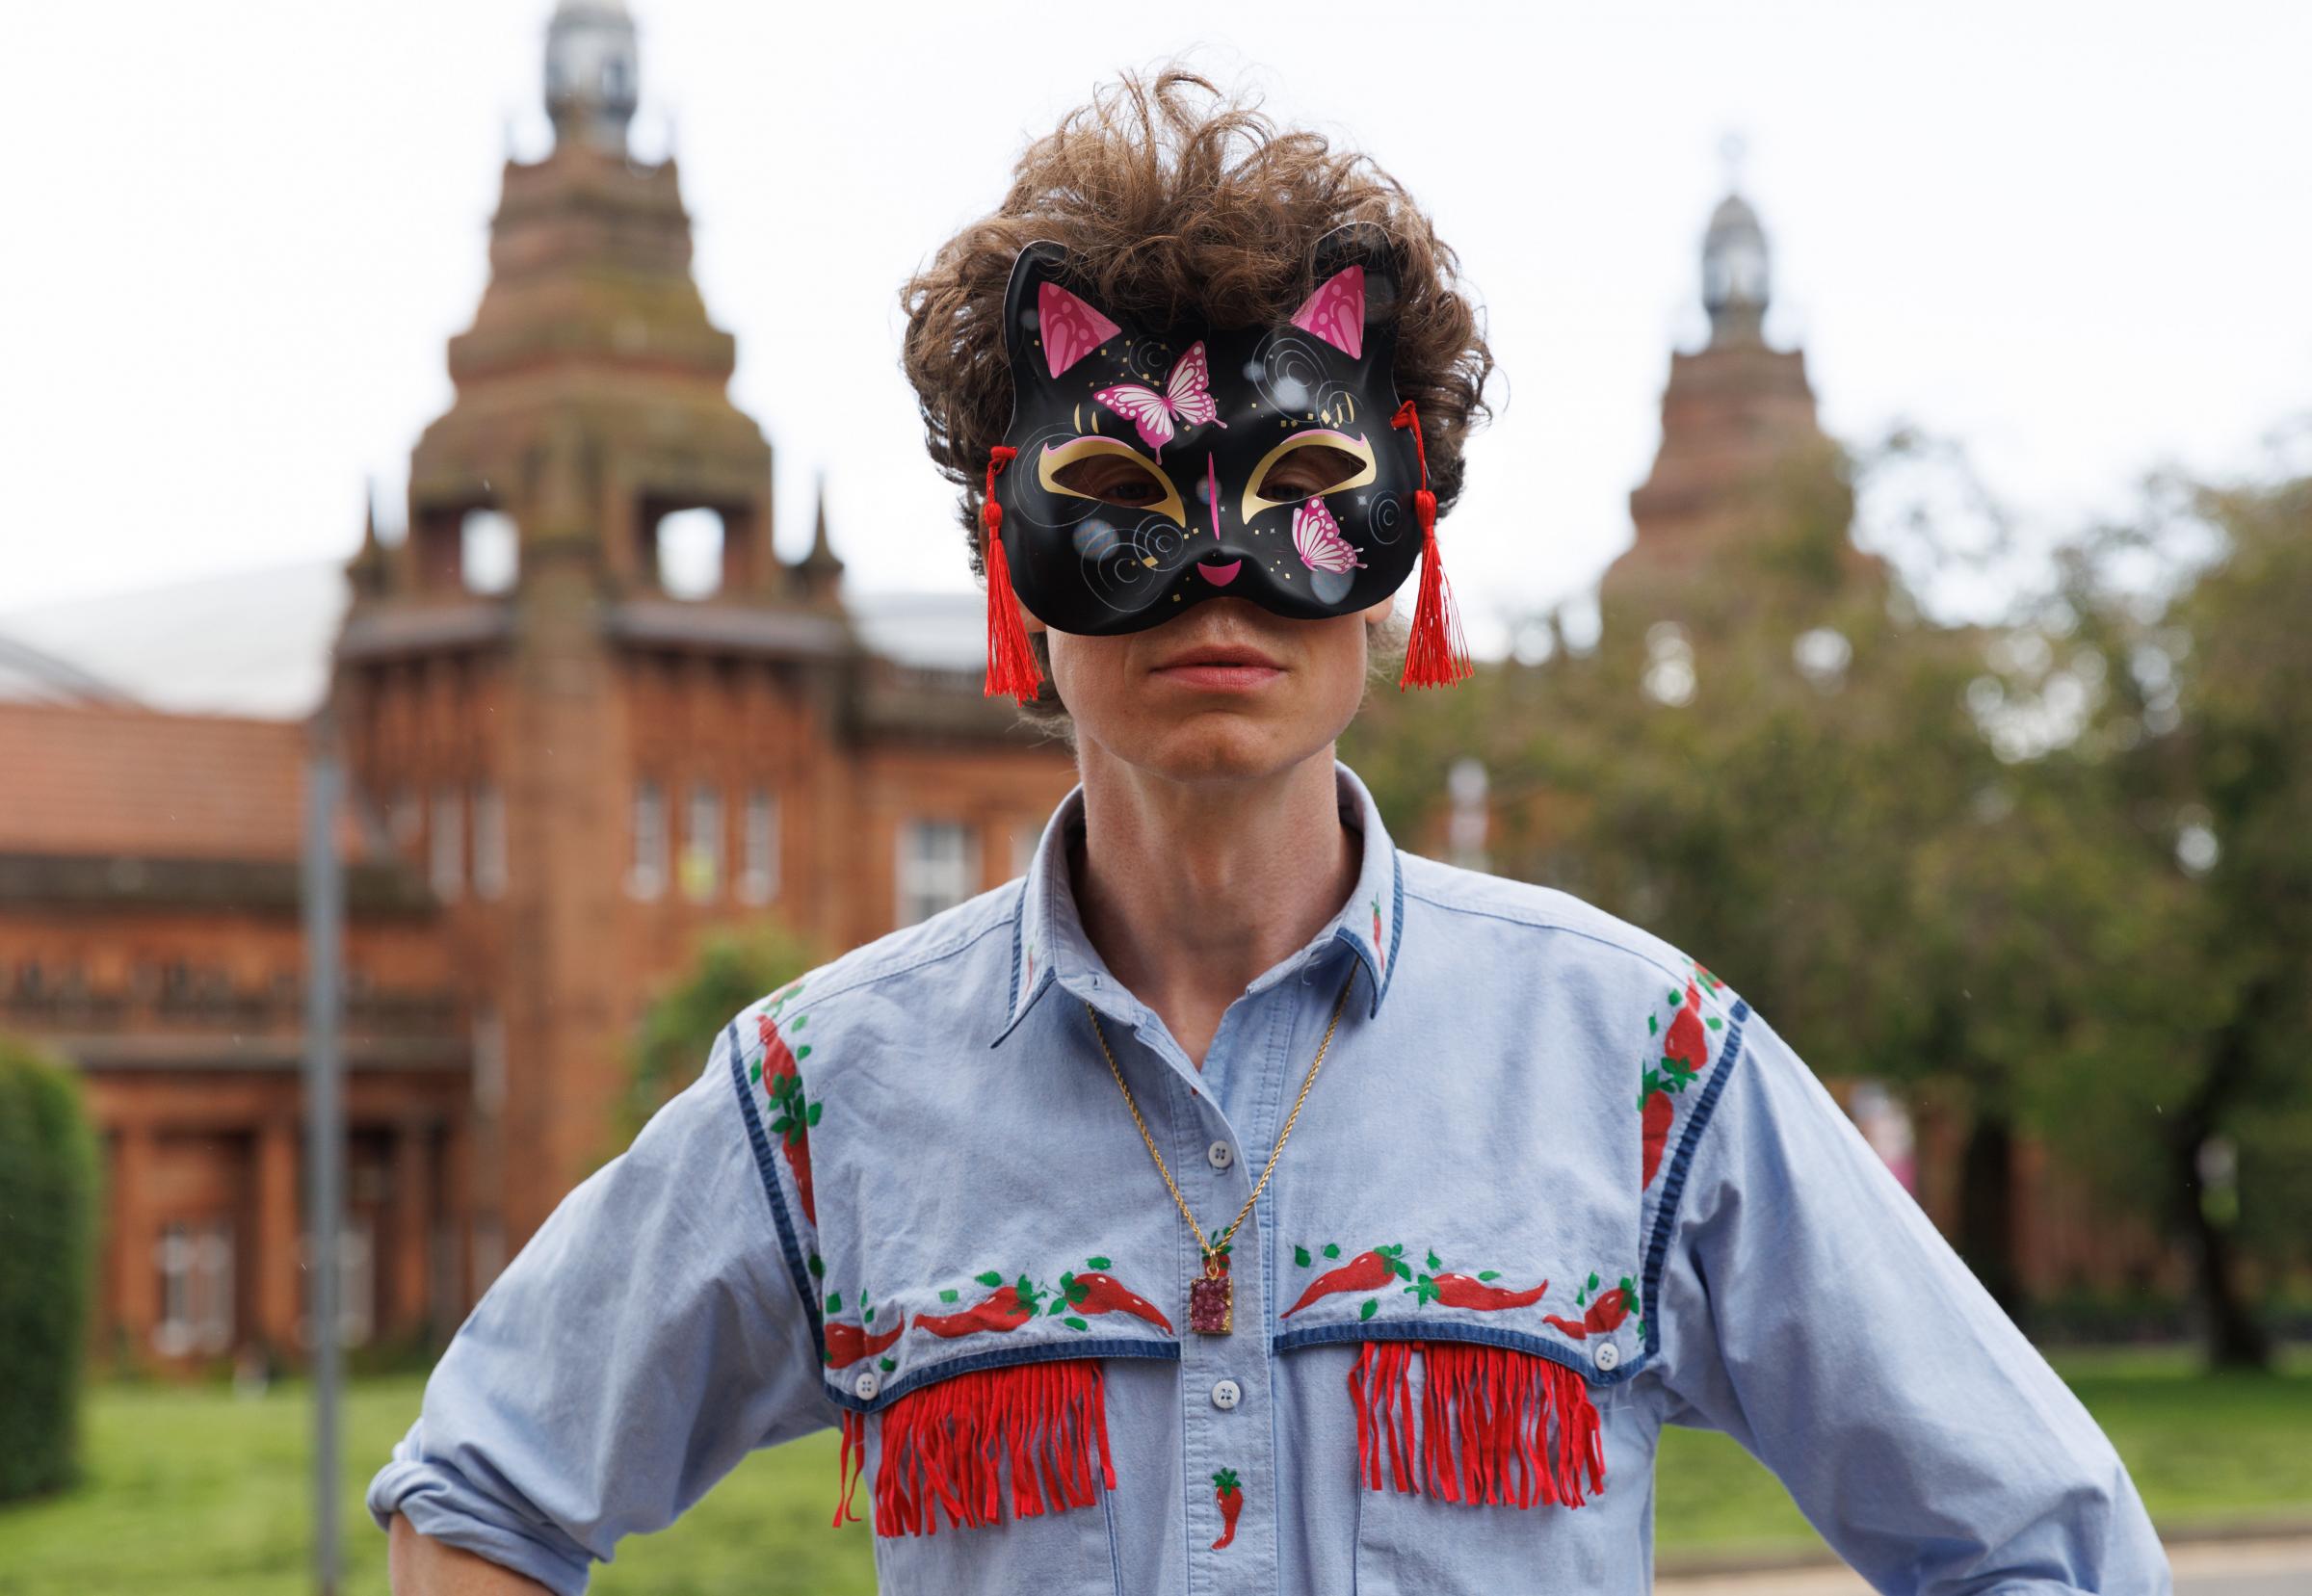 The writer Michael Pedersen pictured in Glasgow with a cat mask. Michaels collection of poems, The Cat Prince has just been published. The title poem from the his new collection of poems, The Cat Prince is about metamorphosing into a cat. Michael